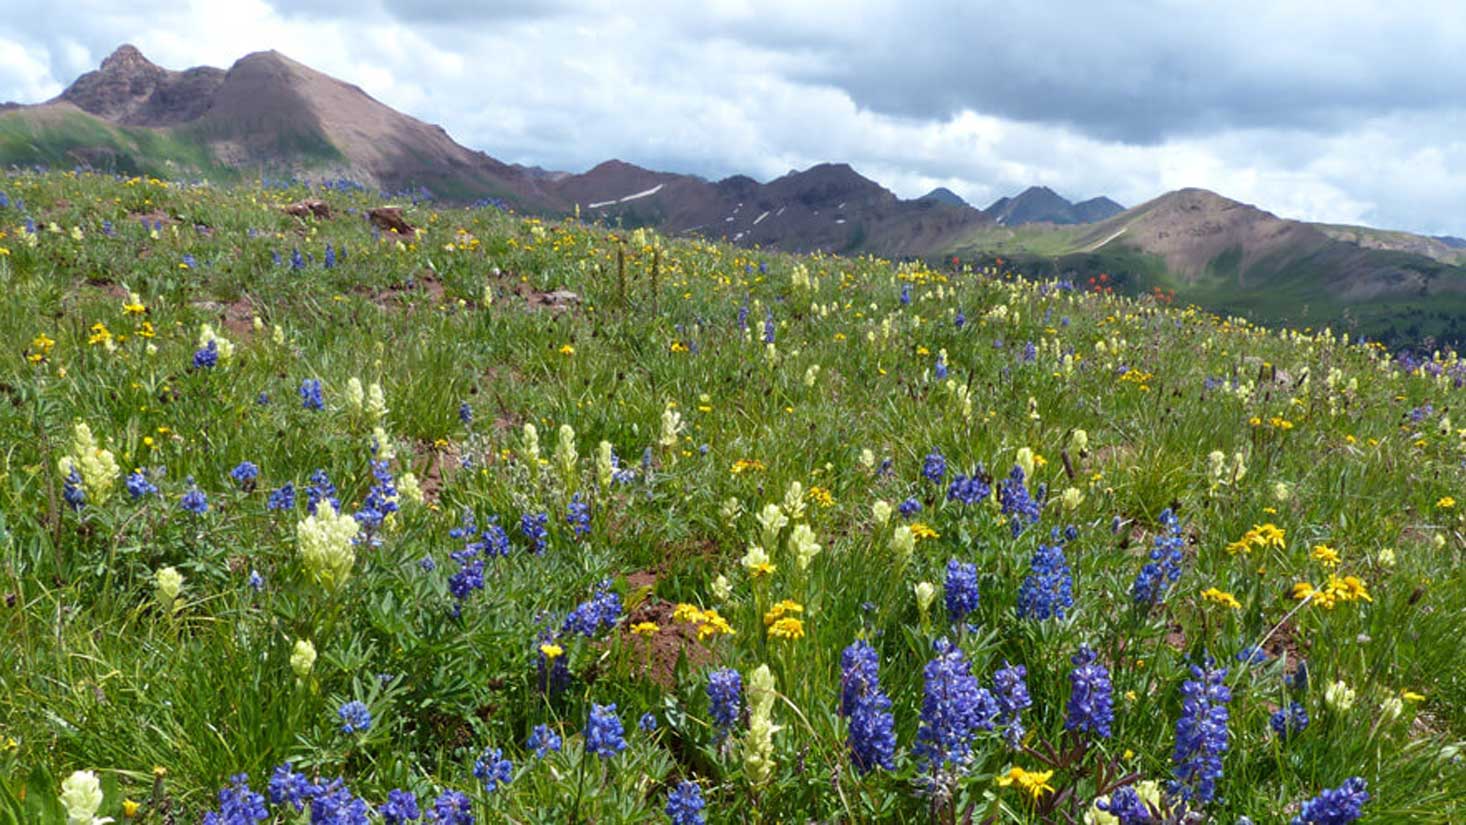 photo of a subalpine meadow full of yellow and blue flowers